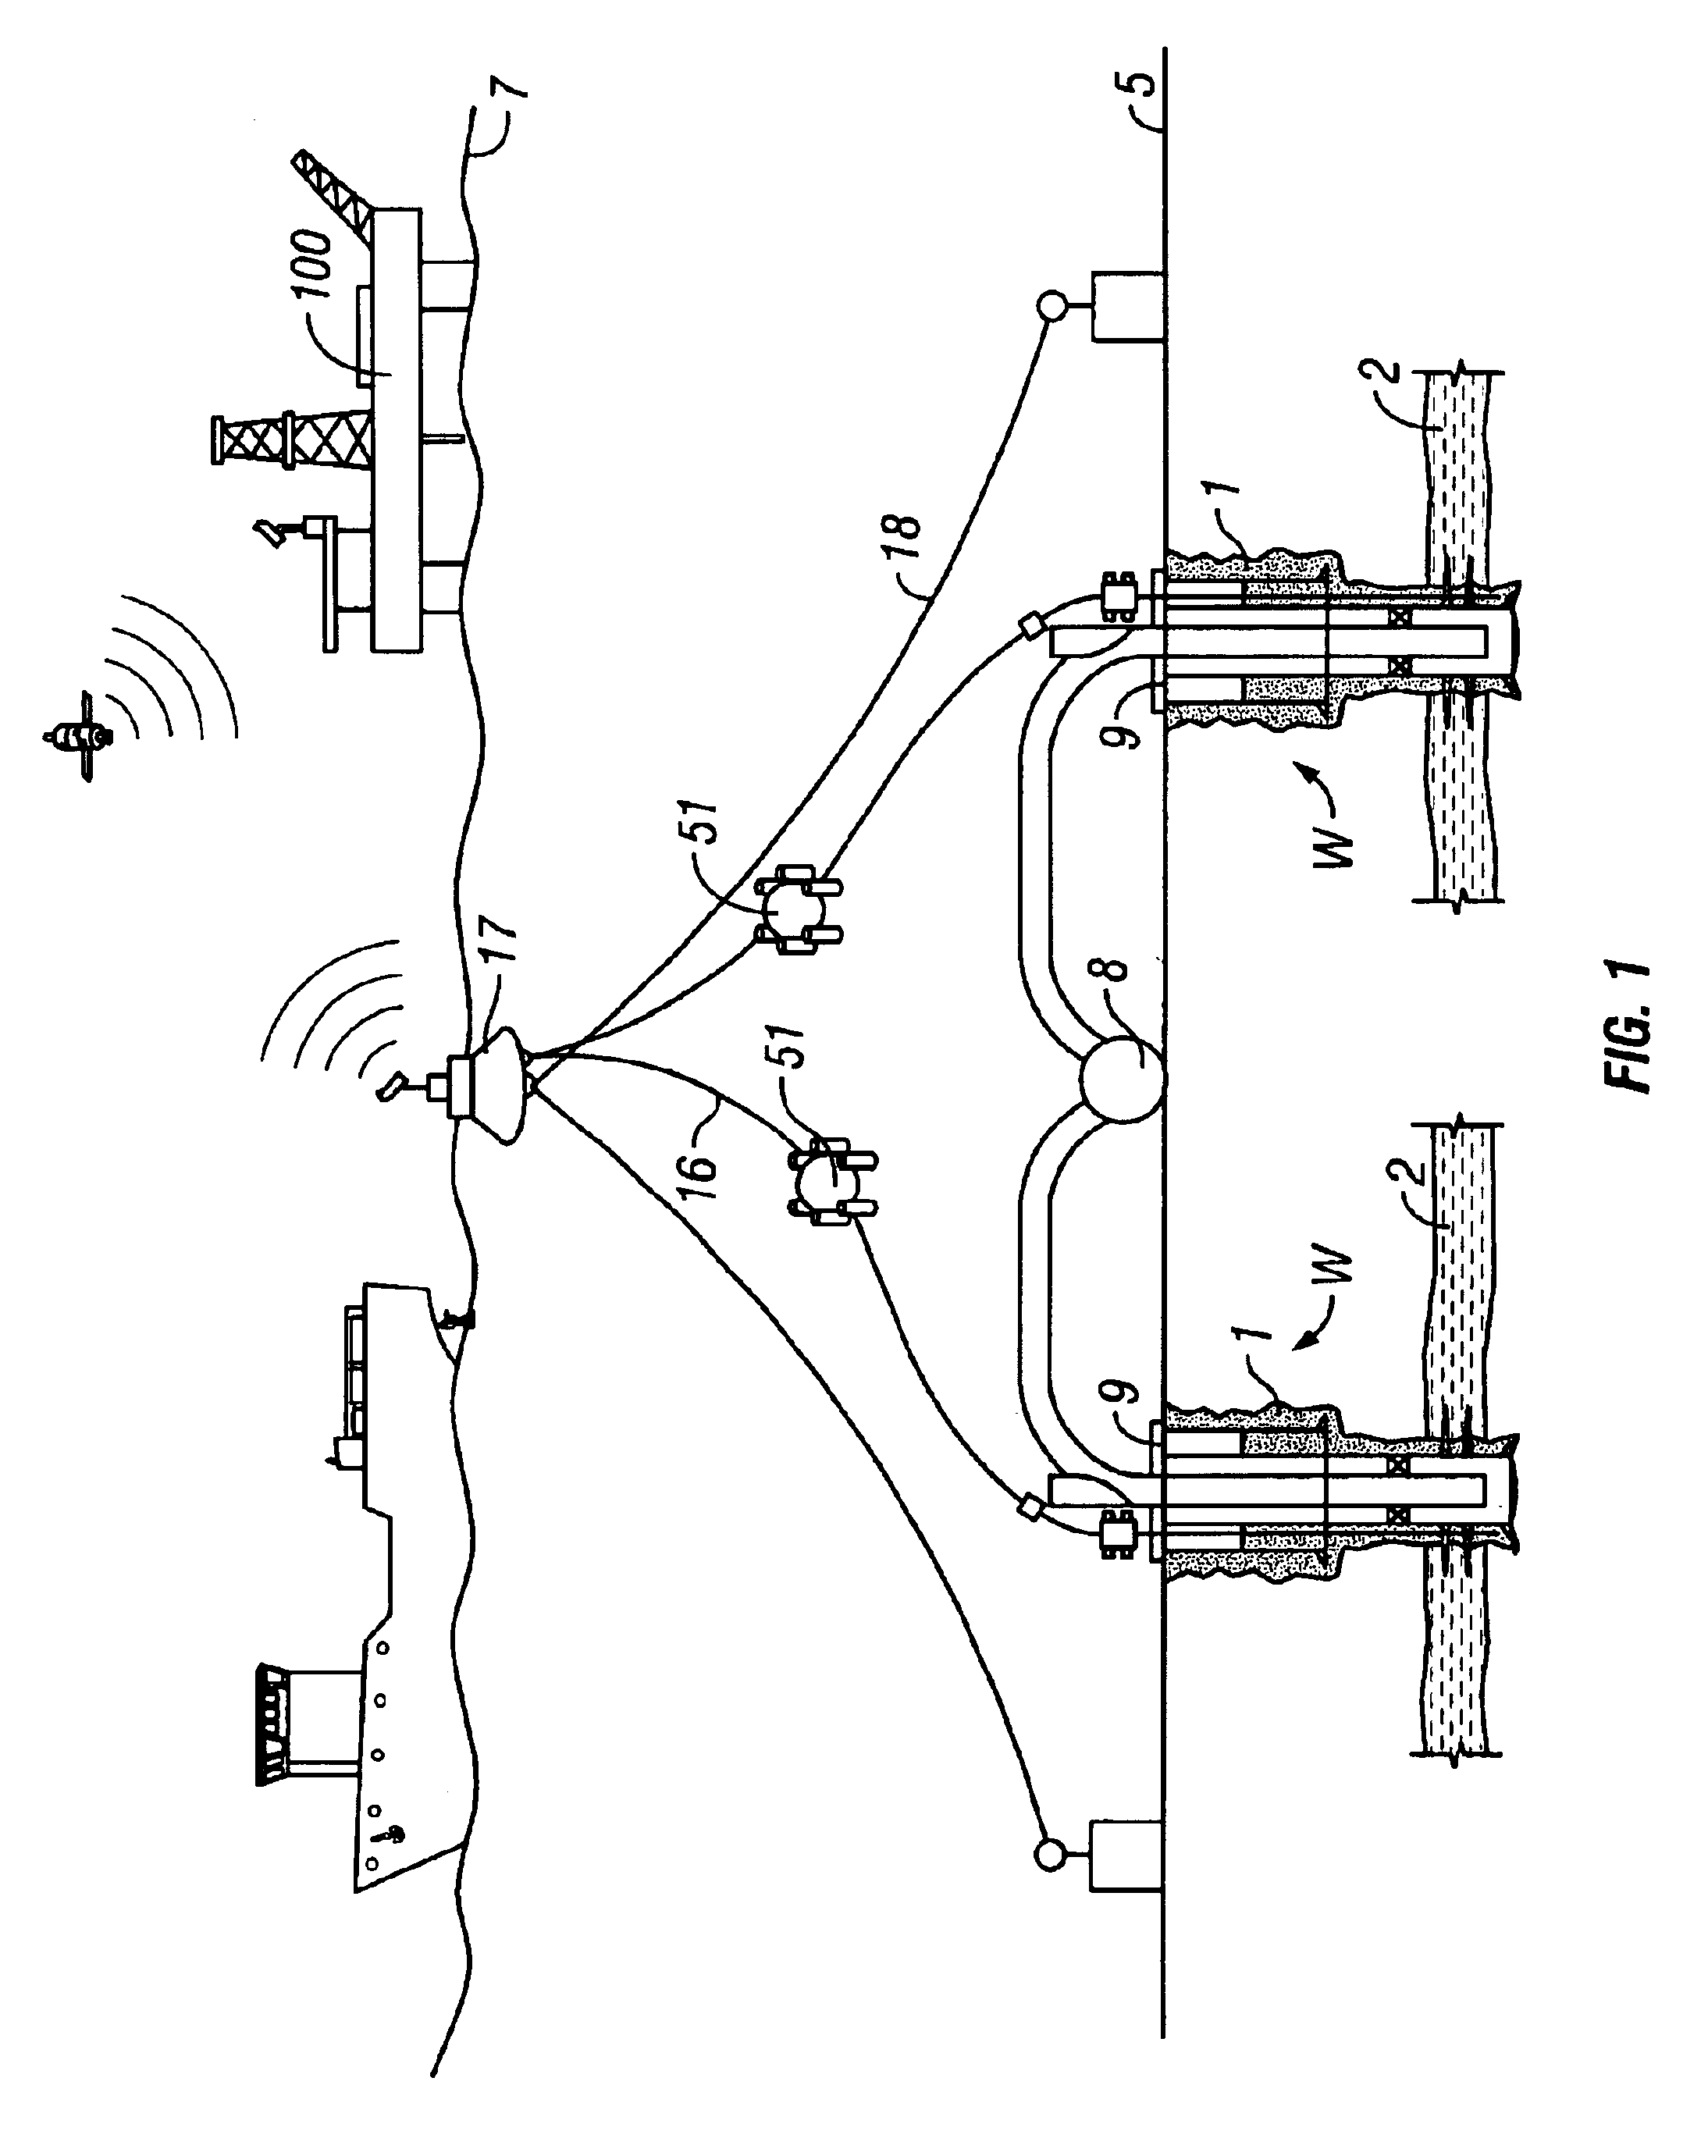 Method and apparatus to monitor, control and log subsea oil and gas wells